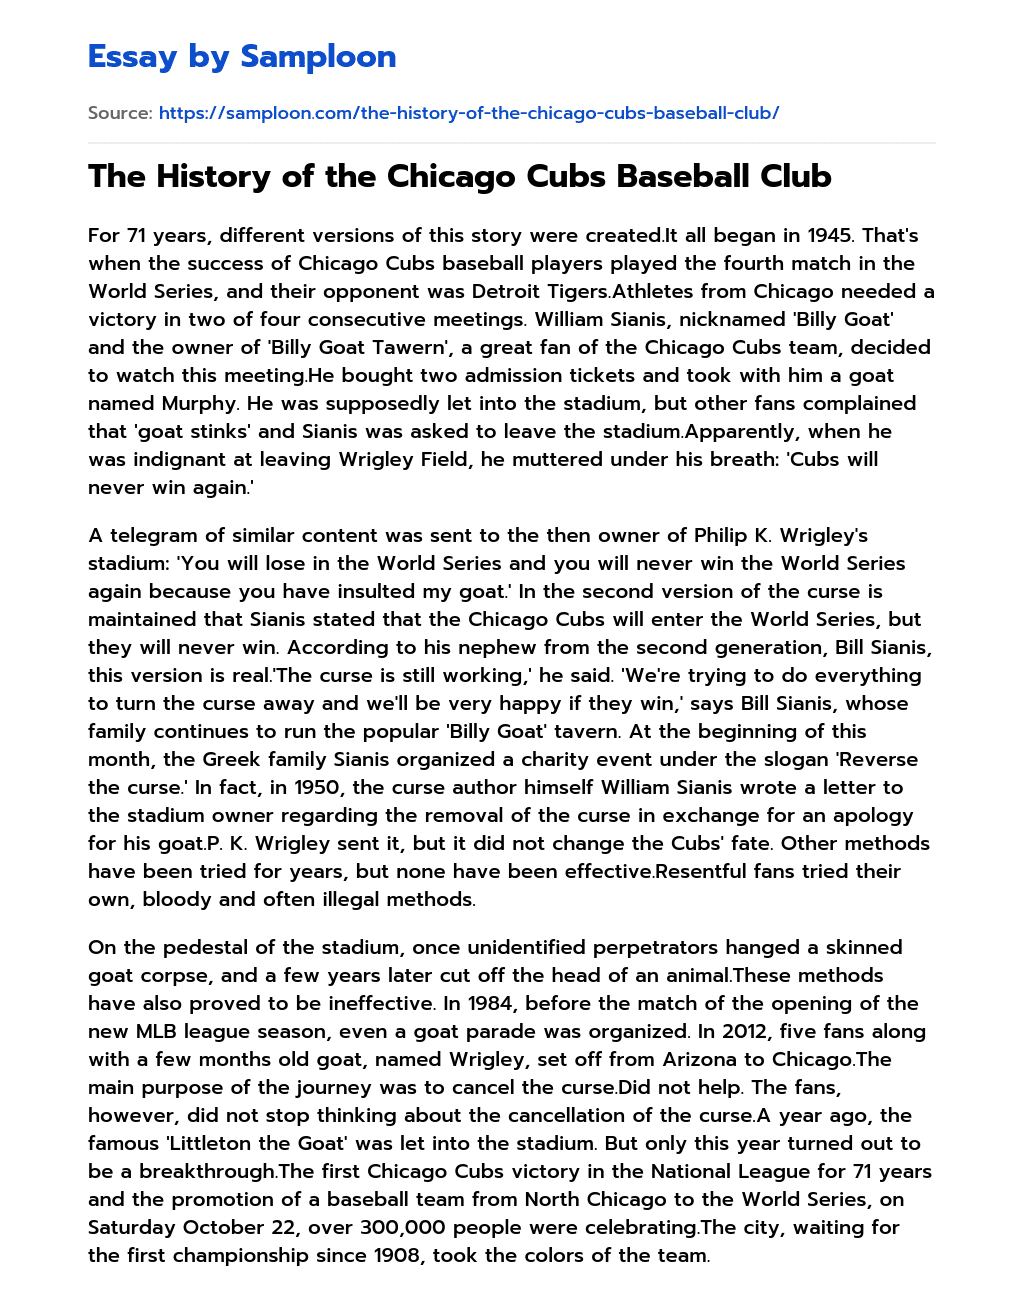 The History of the Chicago Cubs Baseball Club essay